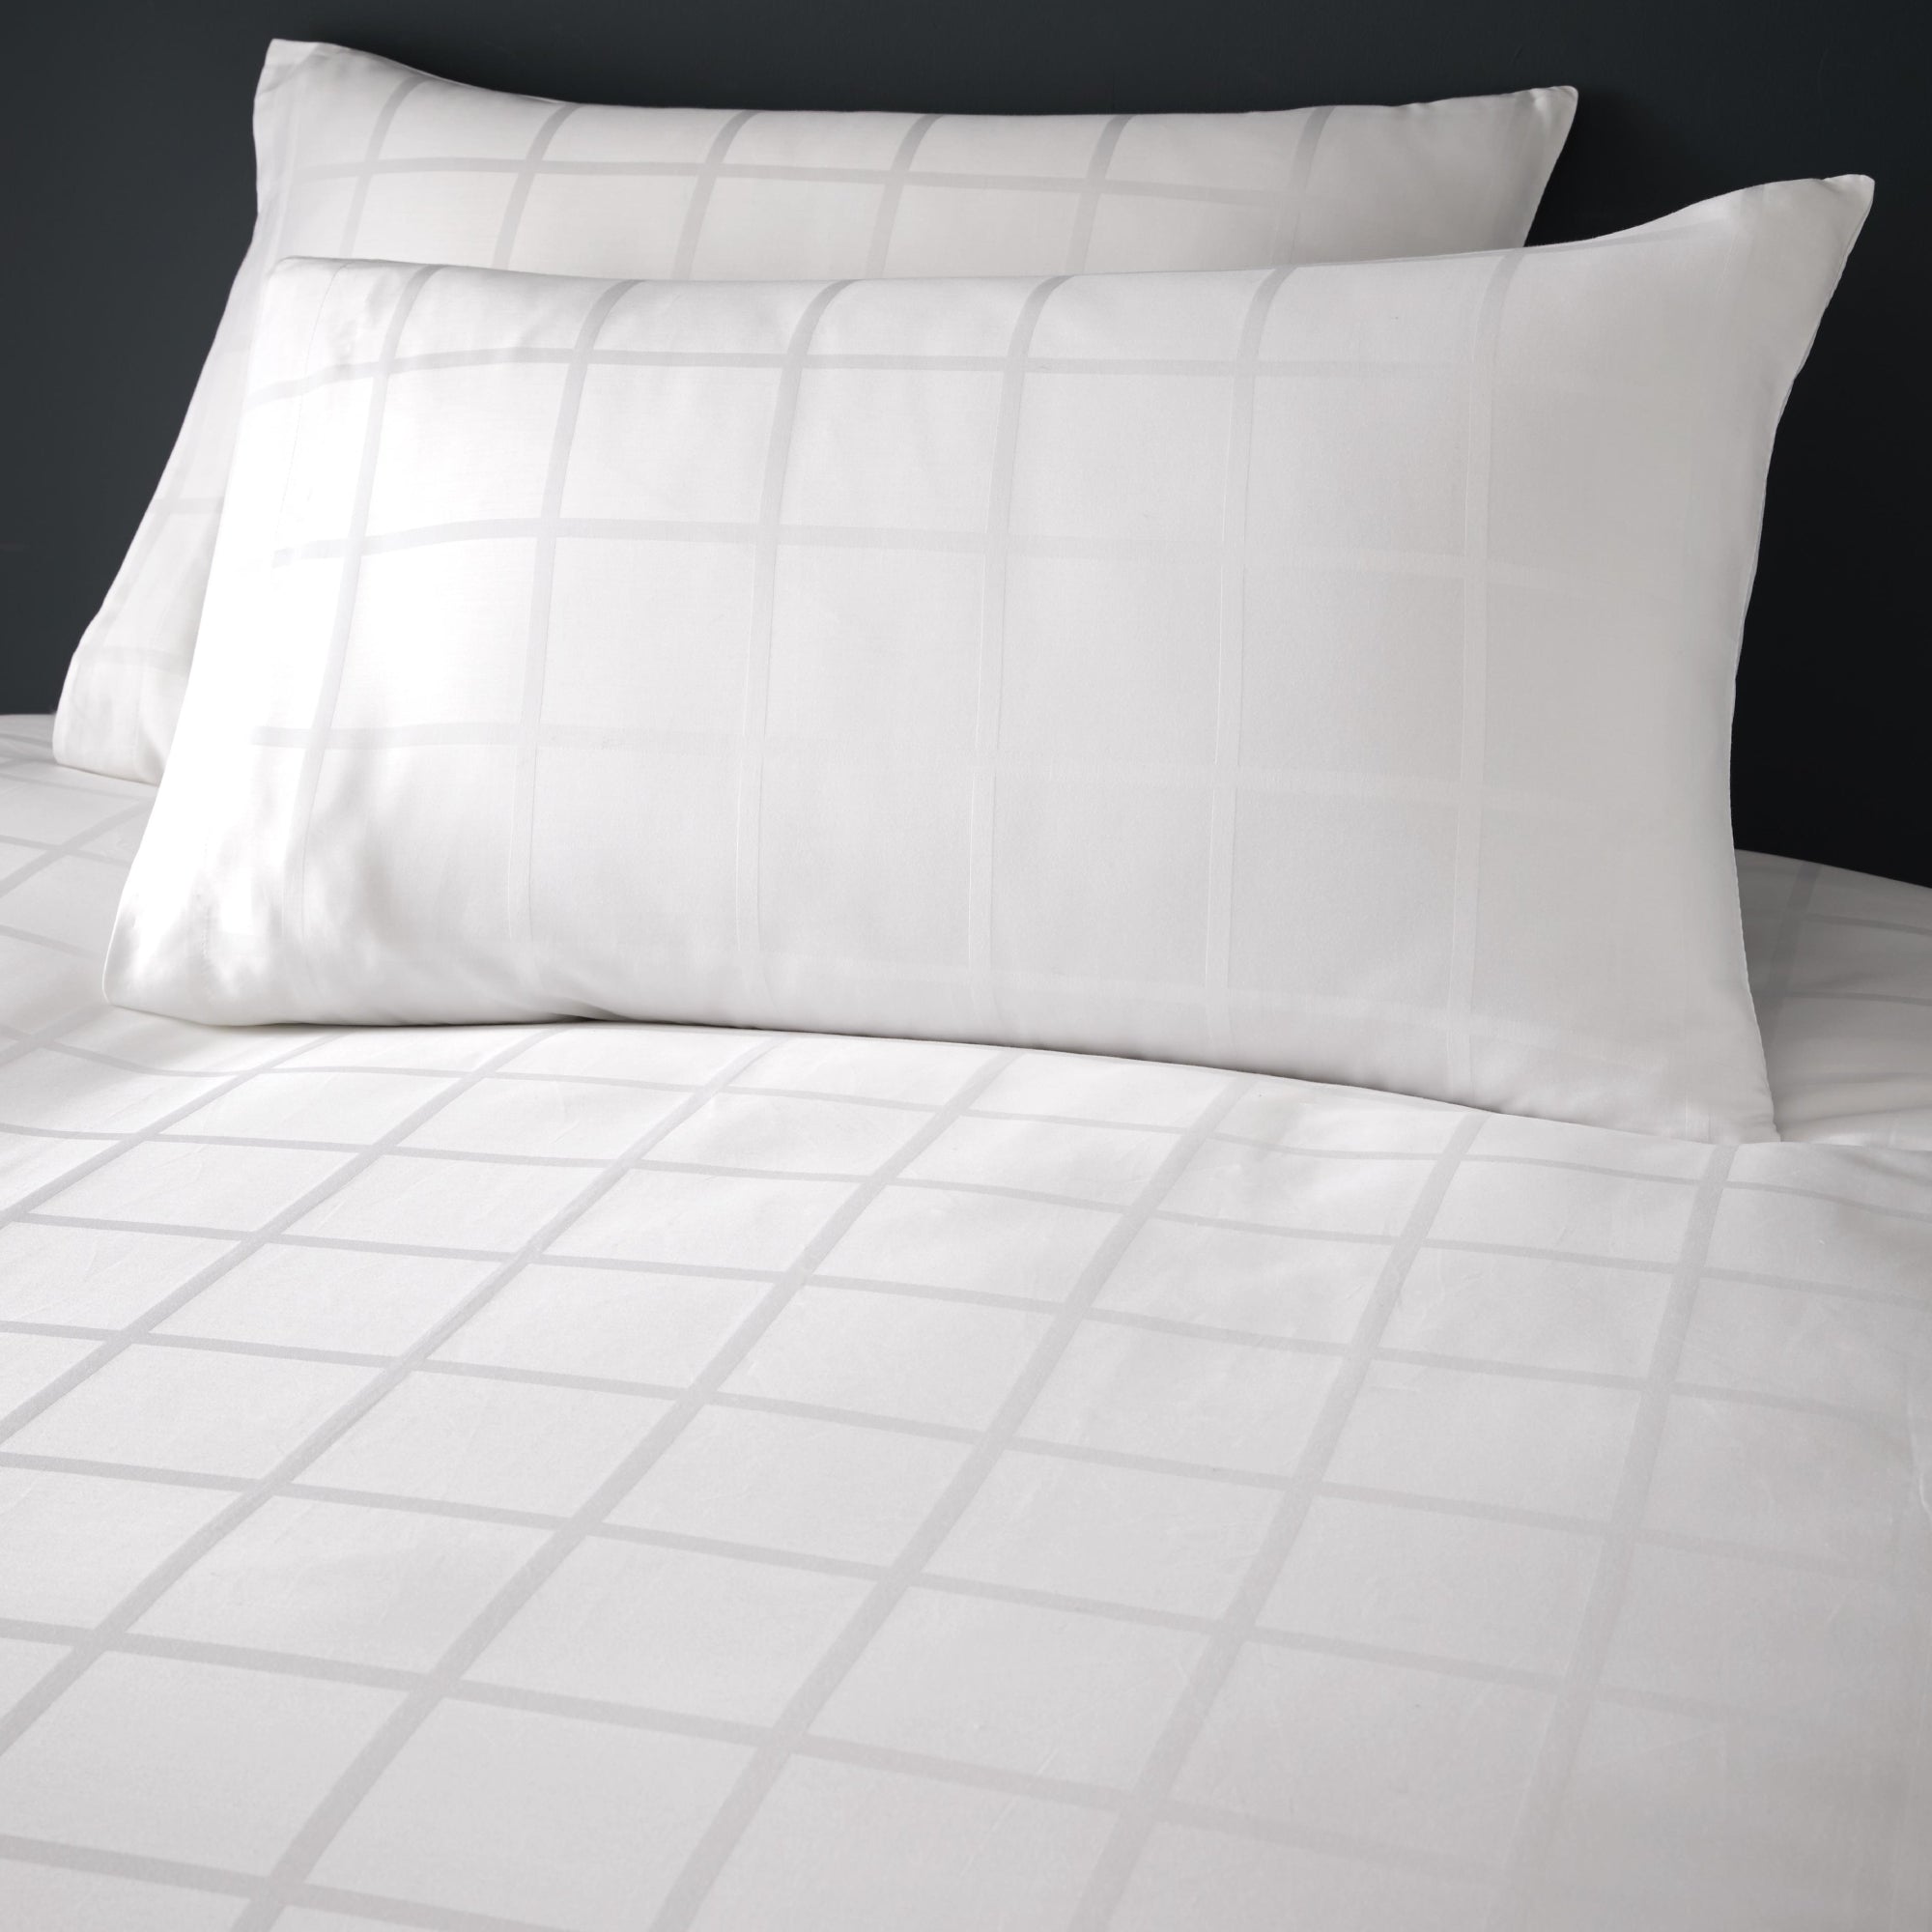 Duvet Cover Set Sorelle by Appletree Boutique in White